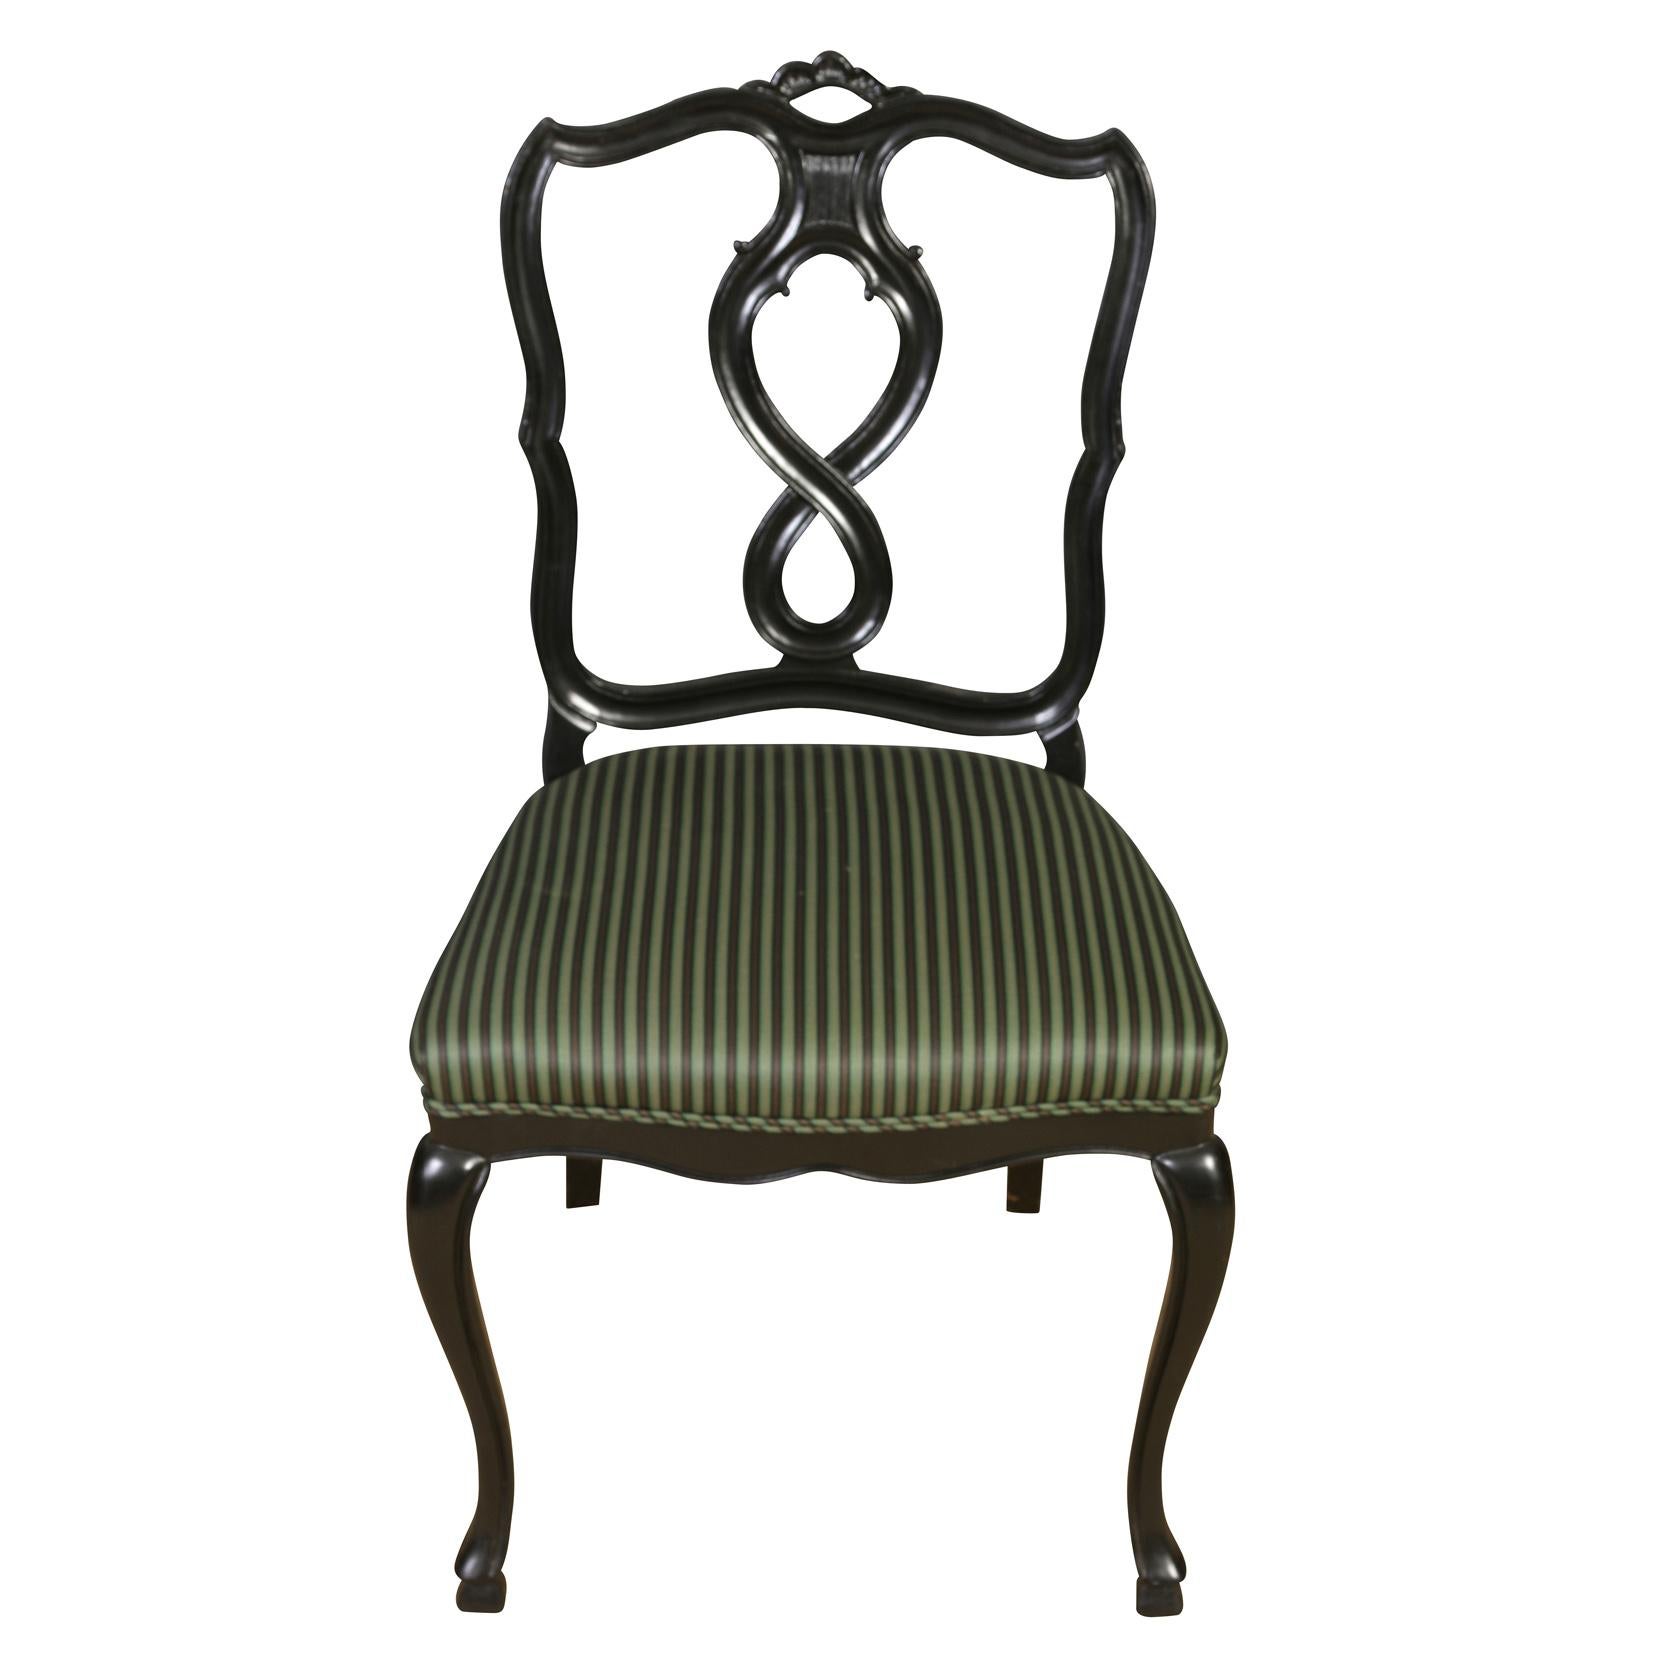 A vintage set of eight dining chairs with black laquered frames, cabriole front legs, a shield back with a curved design and figure eight center splat. Upholstered seats with striped fabric. Side chairs measure 21.5